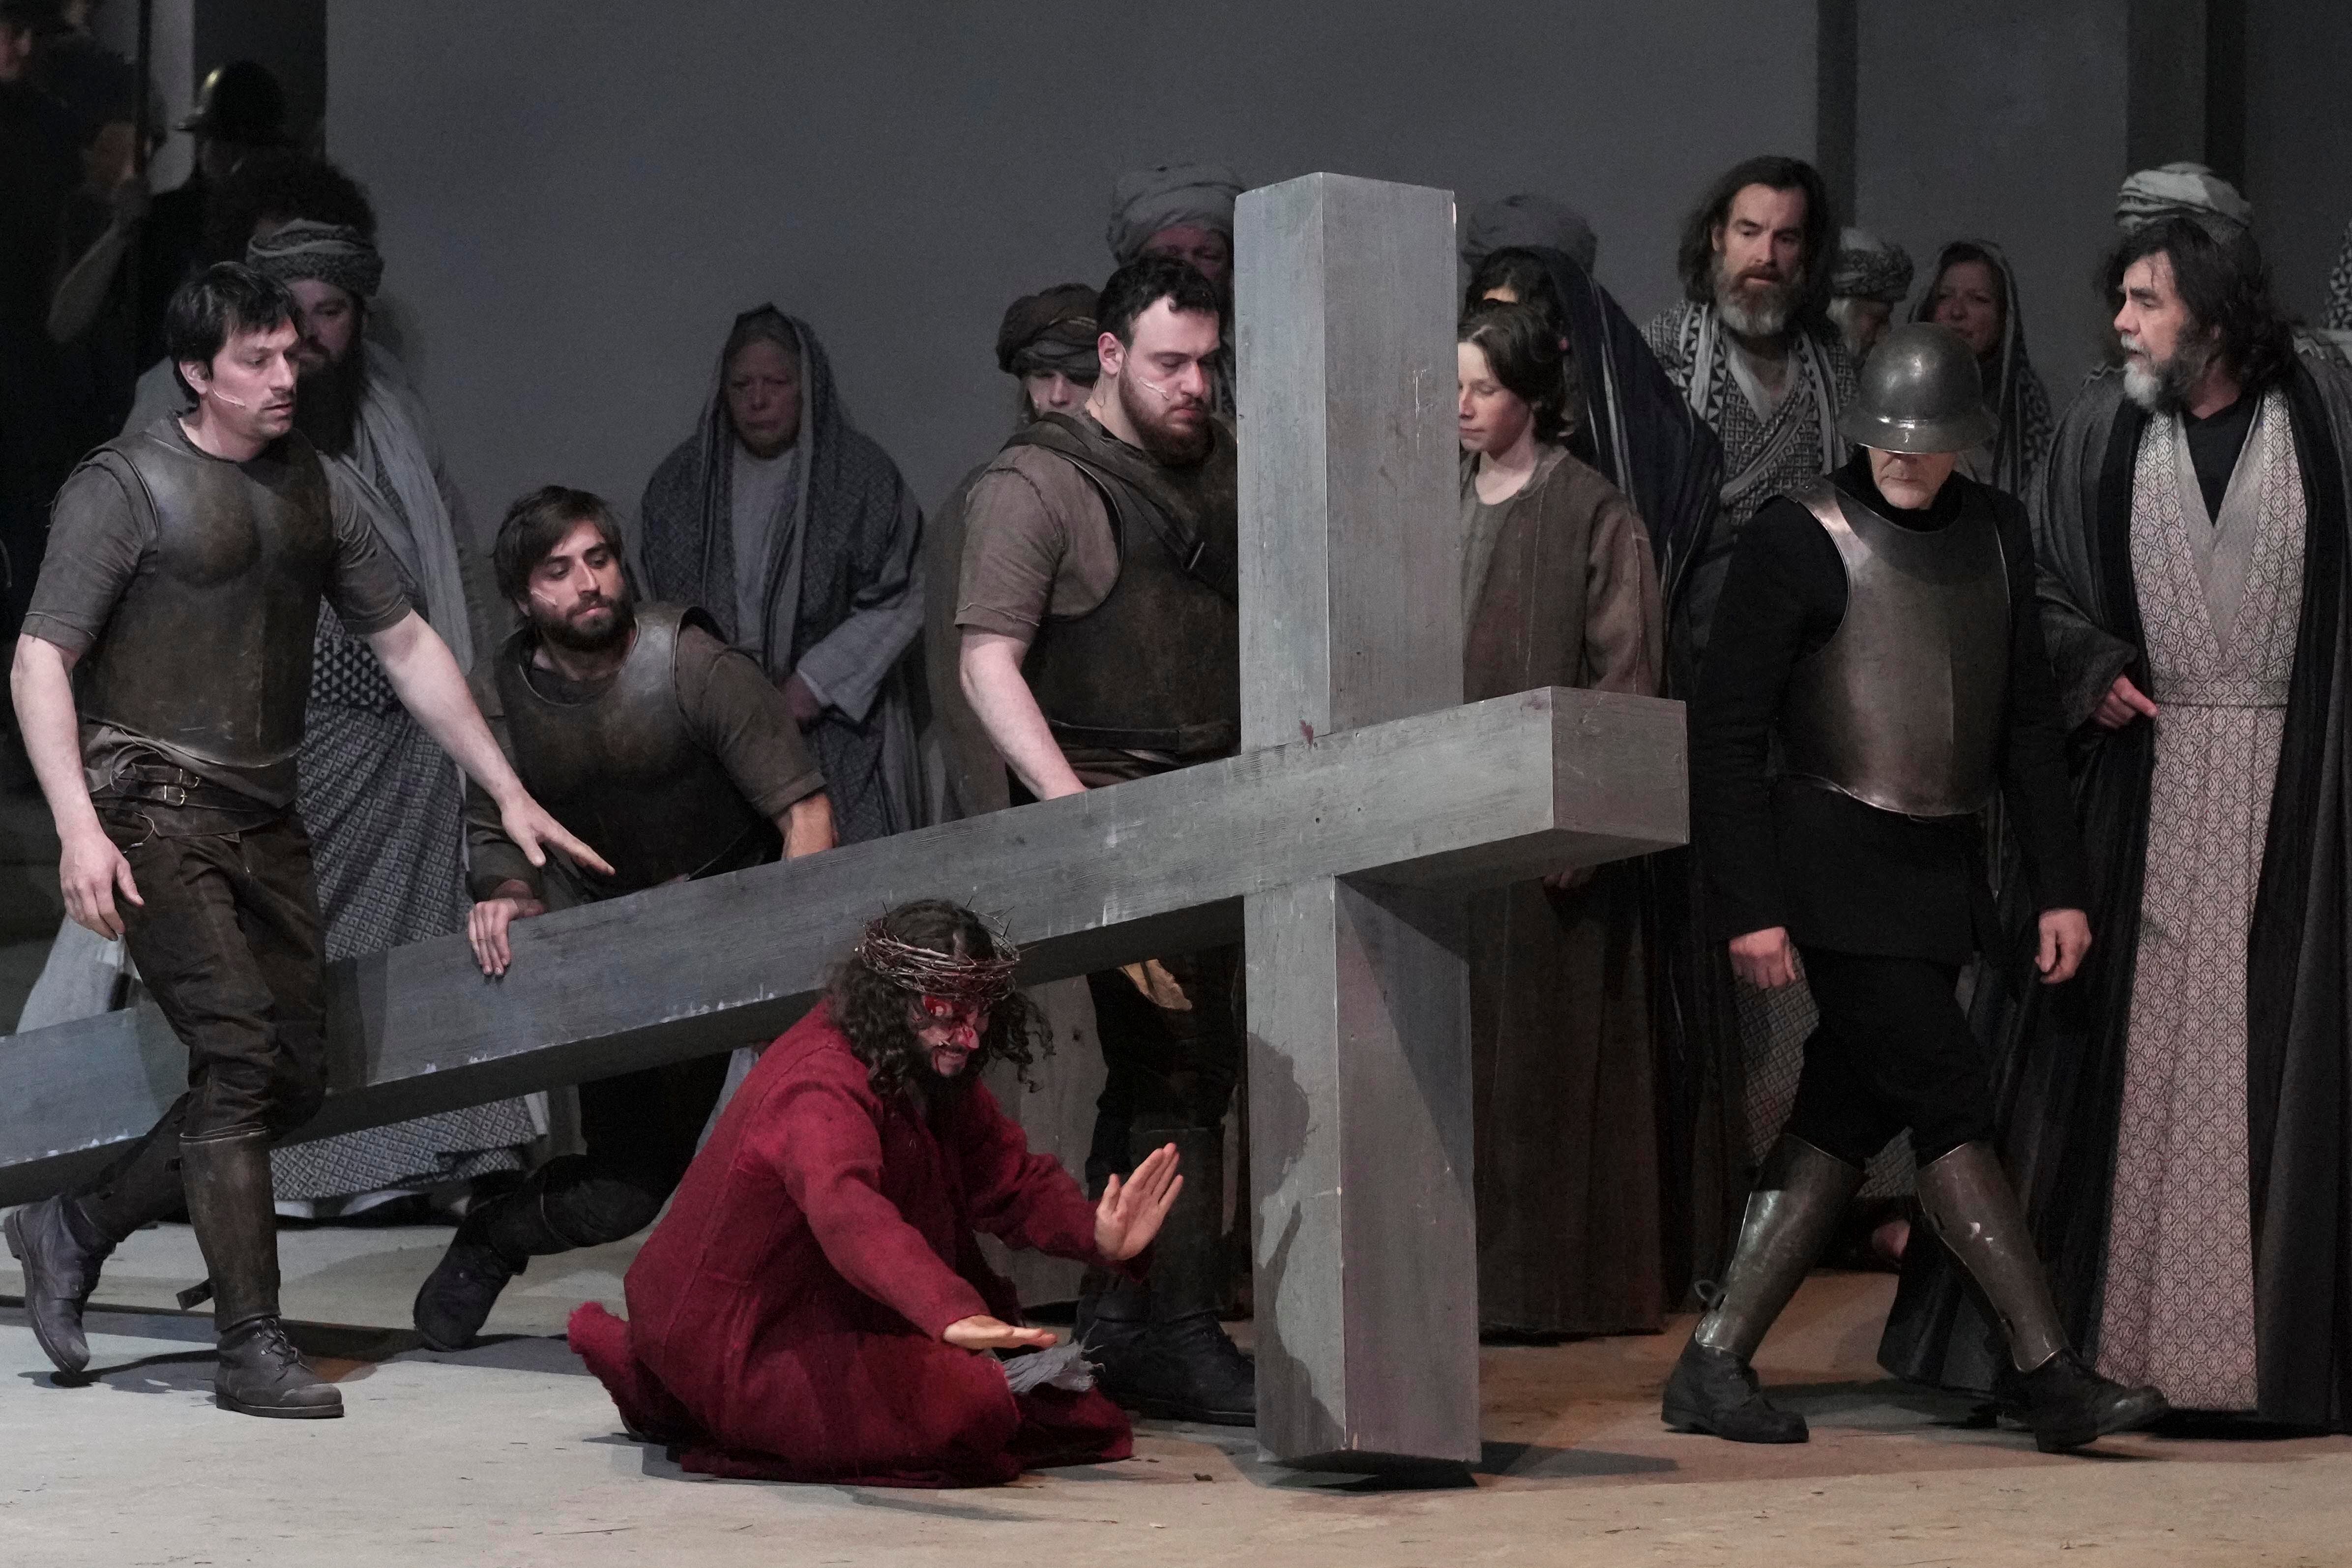 Centuries-old passion play returns after pandemic break